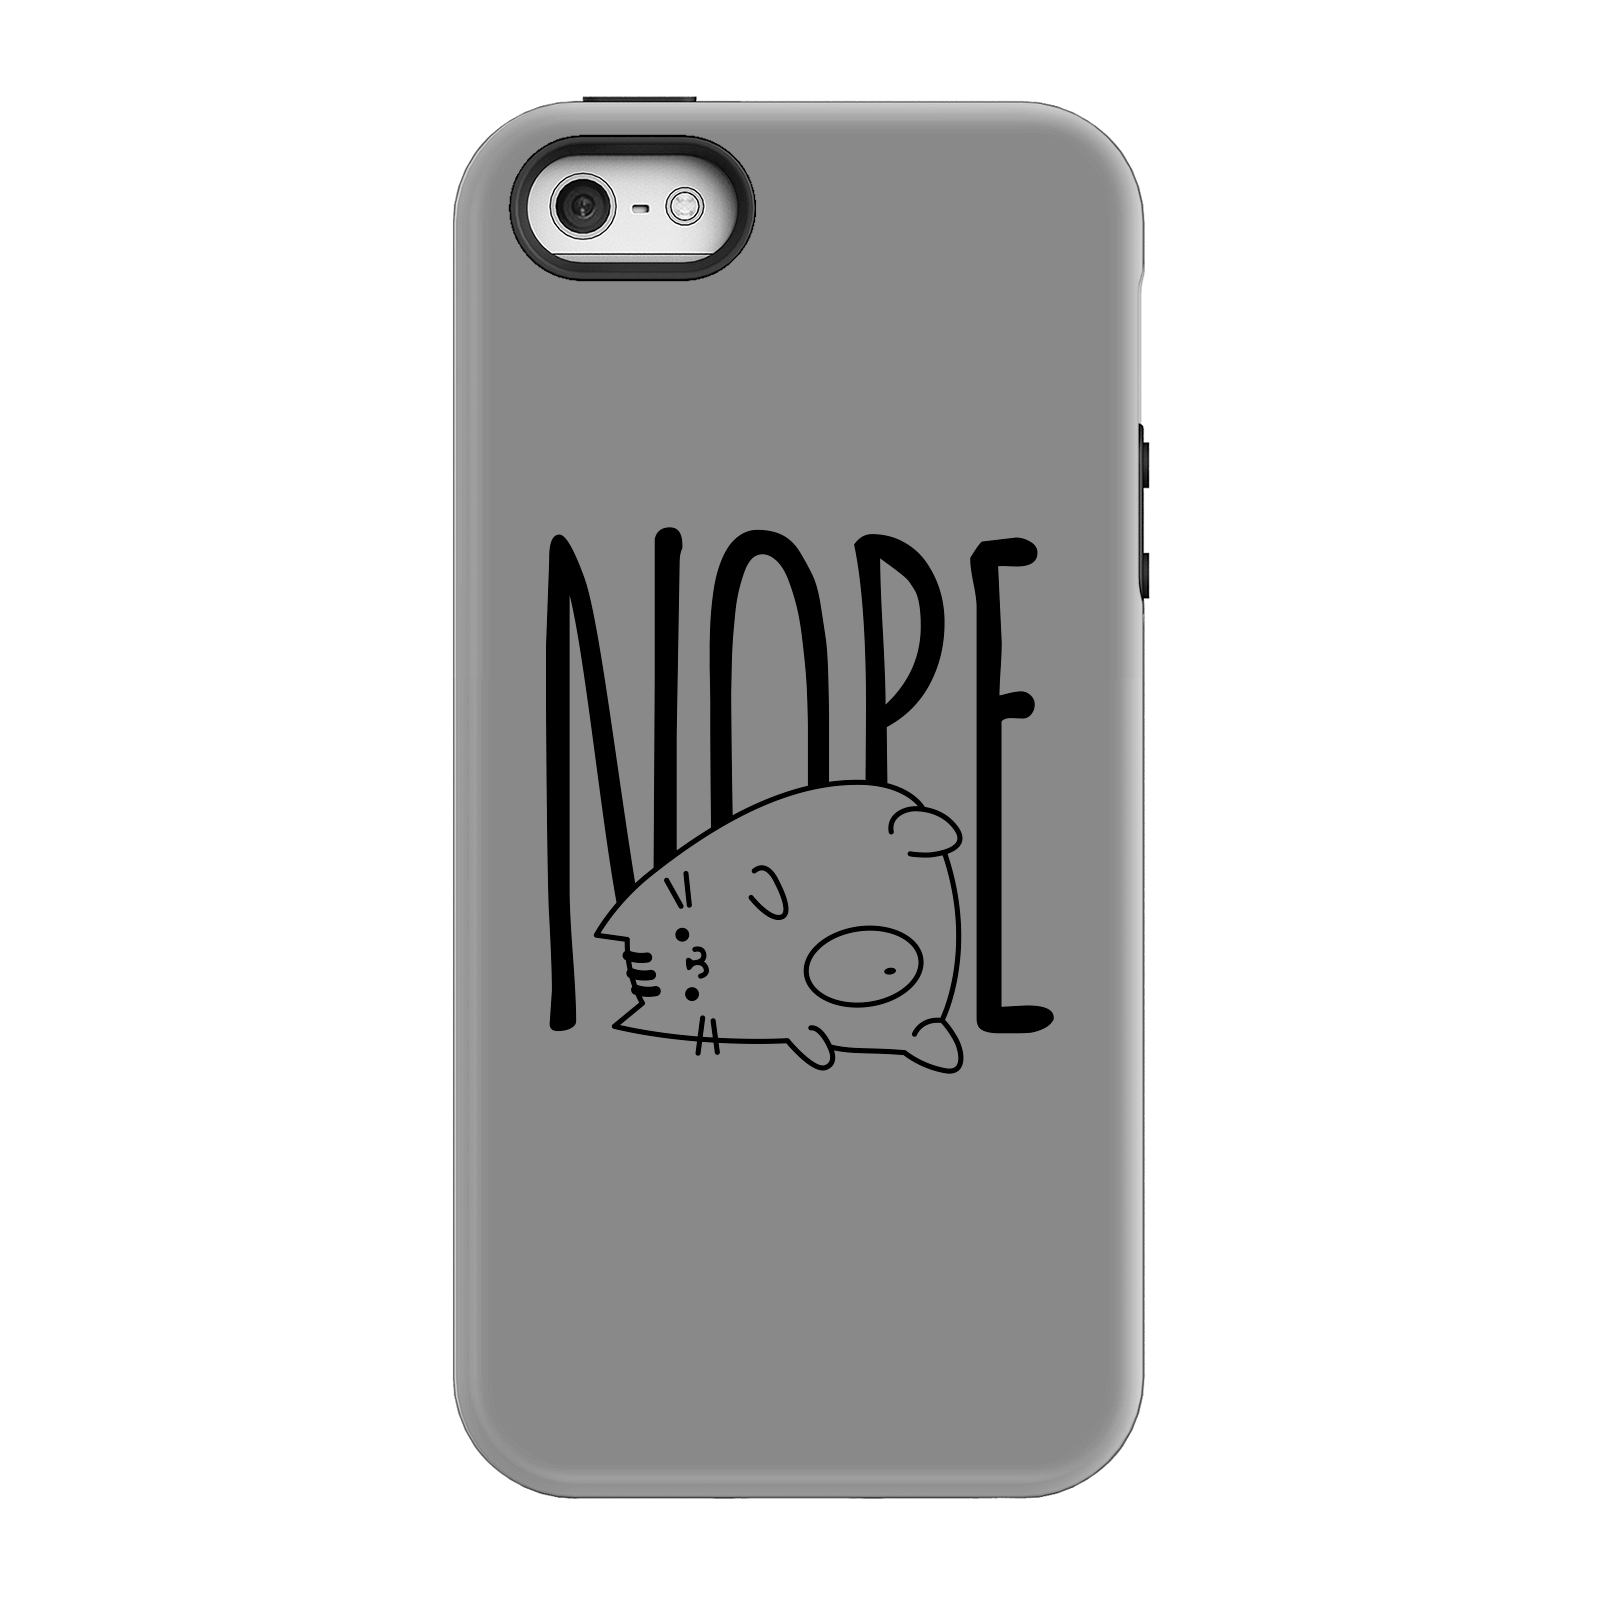 Nope Phone Case for iPhone and Android - iPhone 5/5s - Tough Case - Matte